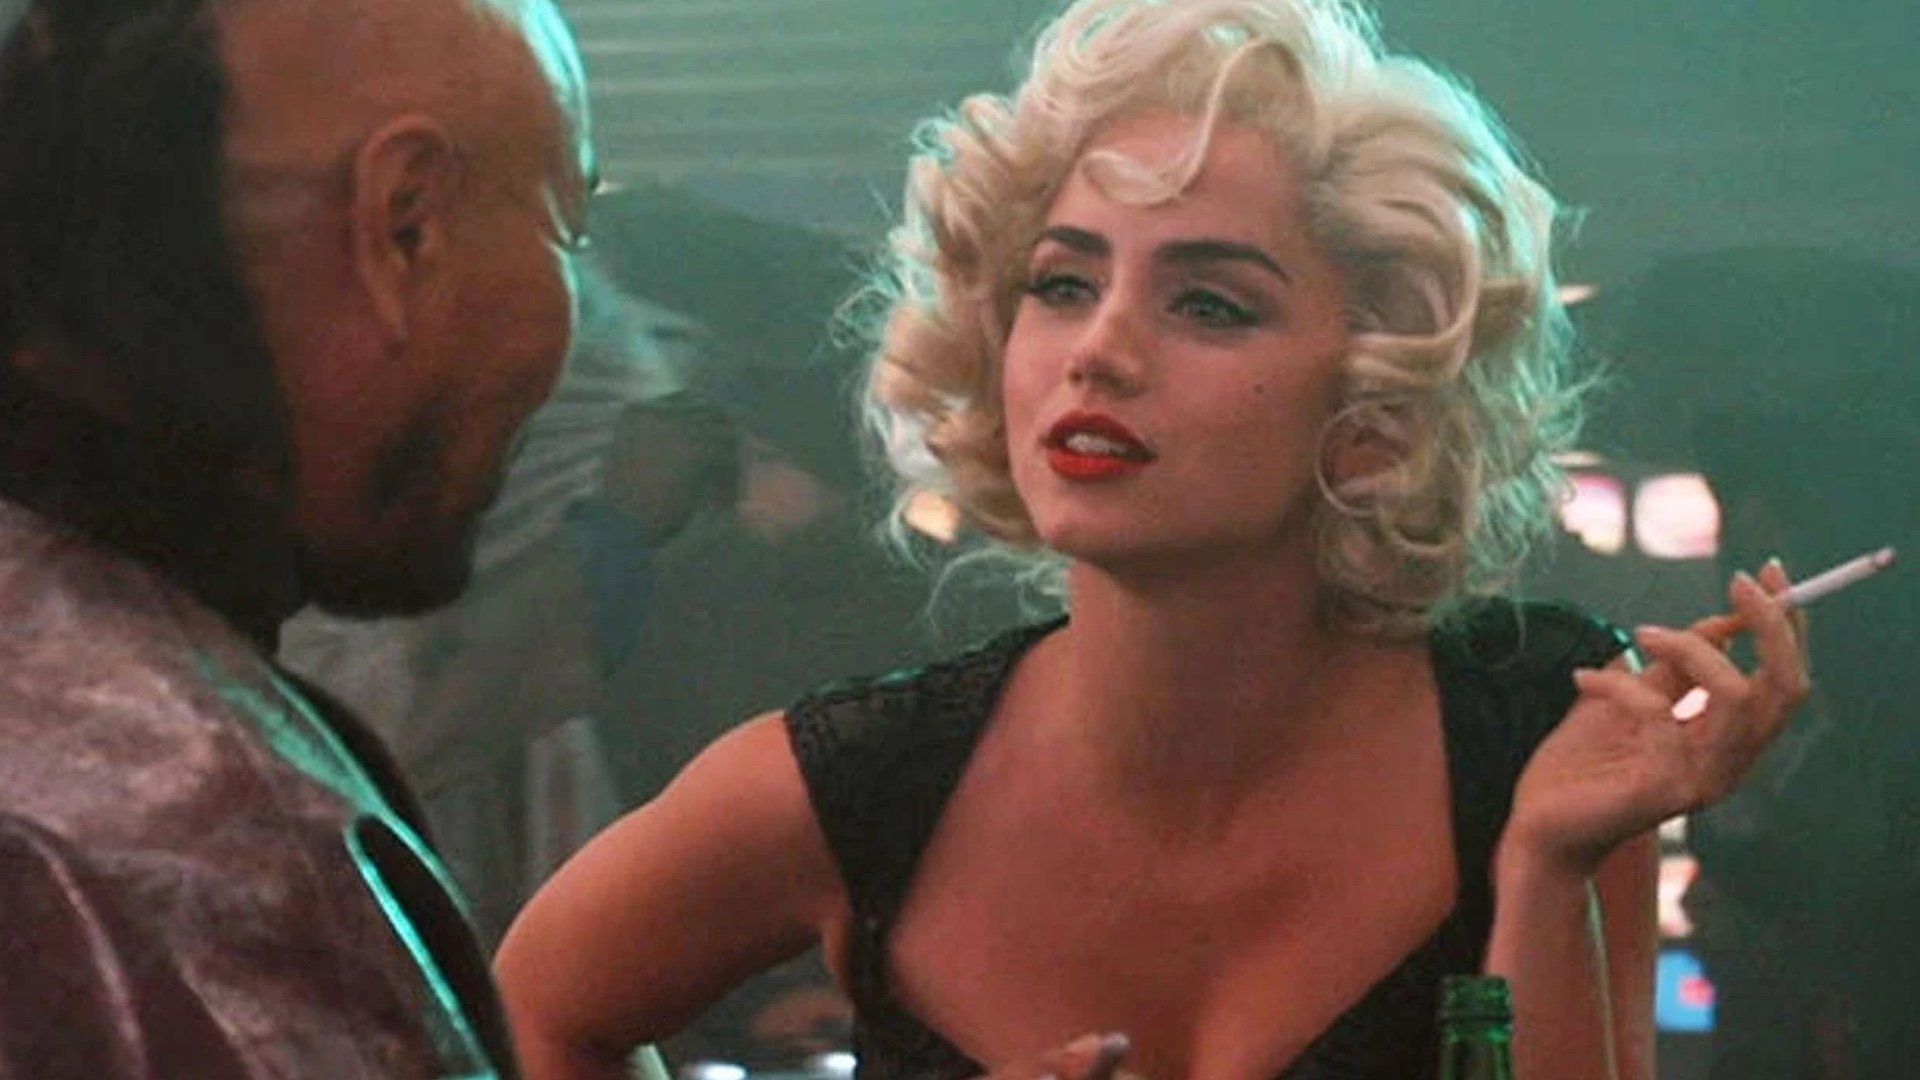 From 'Bond' Girl to Marilyn: Who is Ana de Armas?